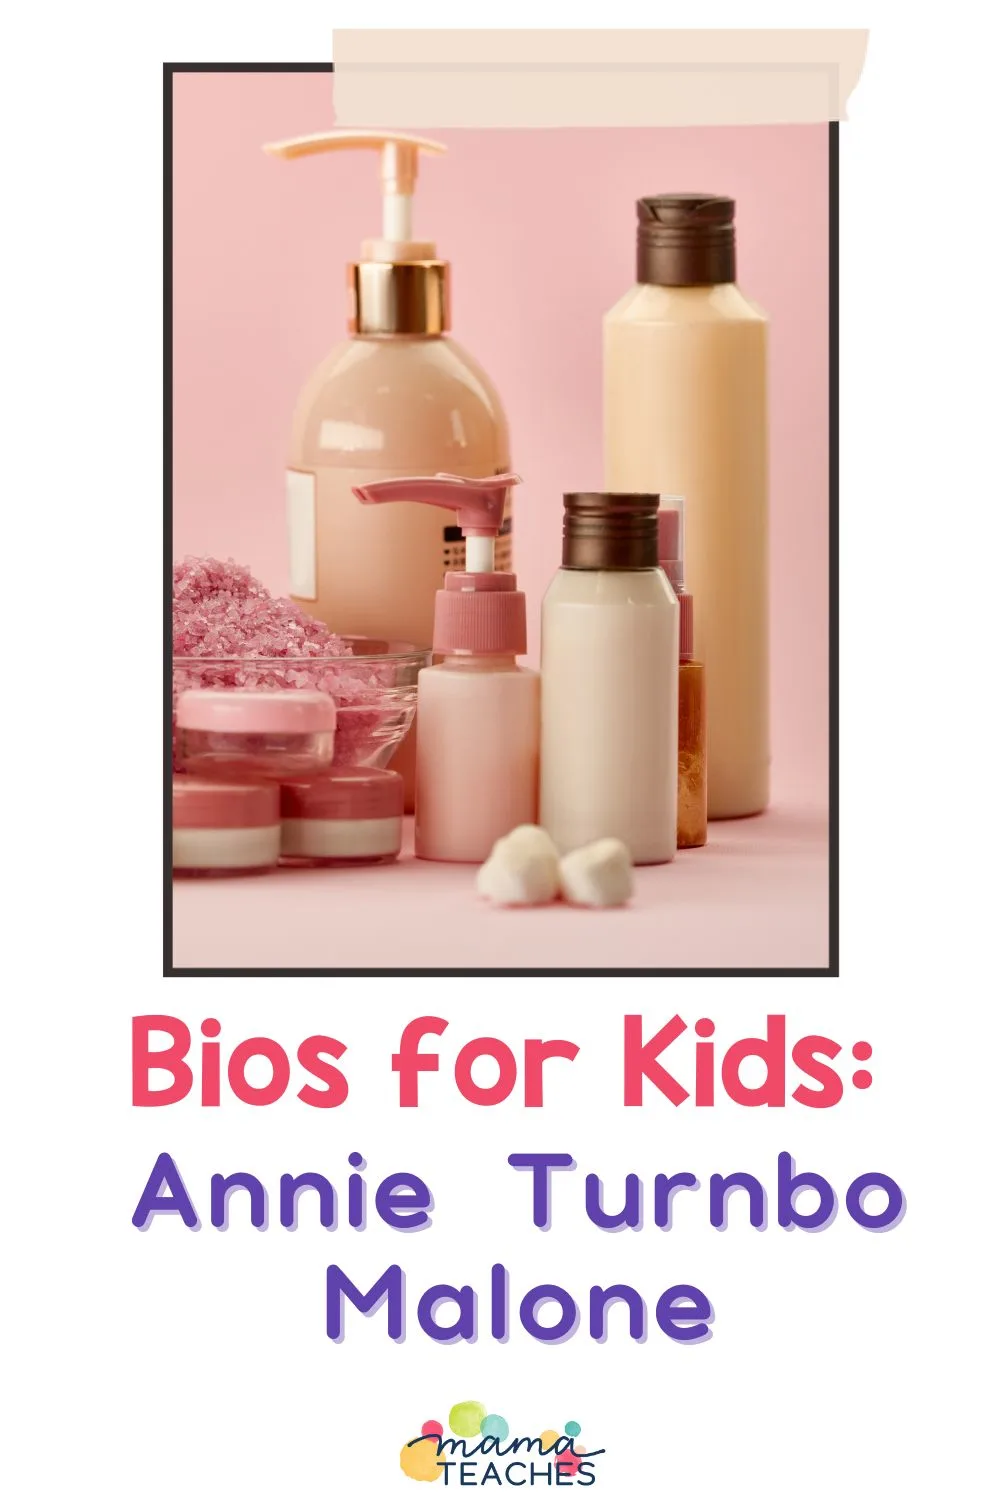 Bios for Kids Annie Turnbo Malone